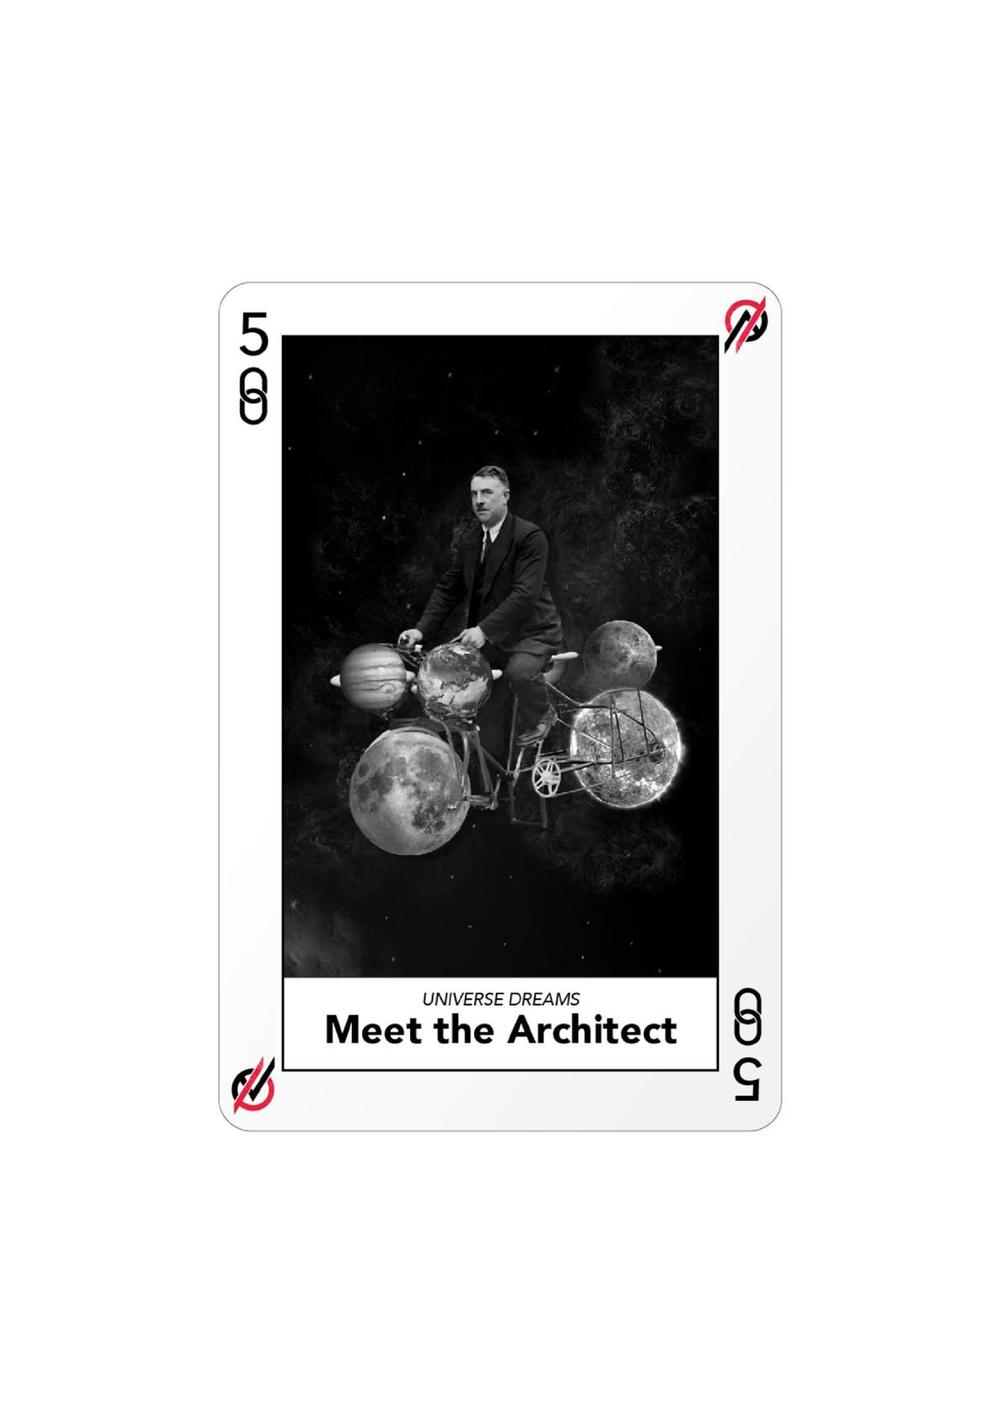 Certificate of Authenticity and Consignment - Meet the Architect